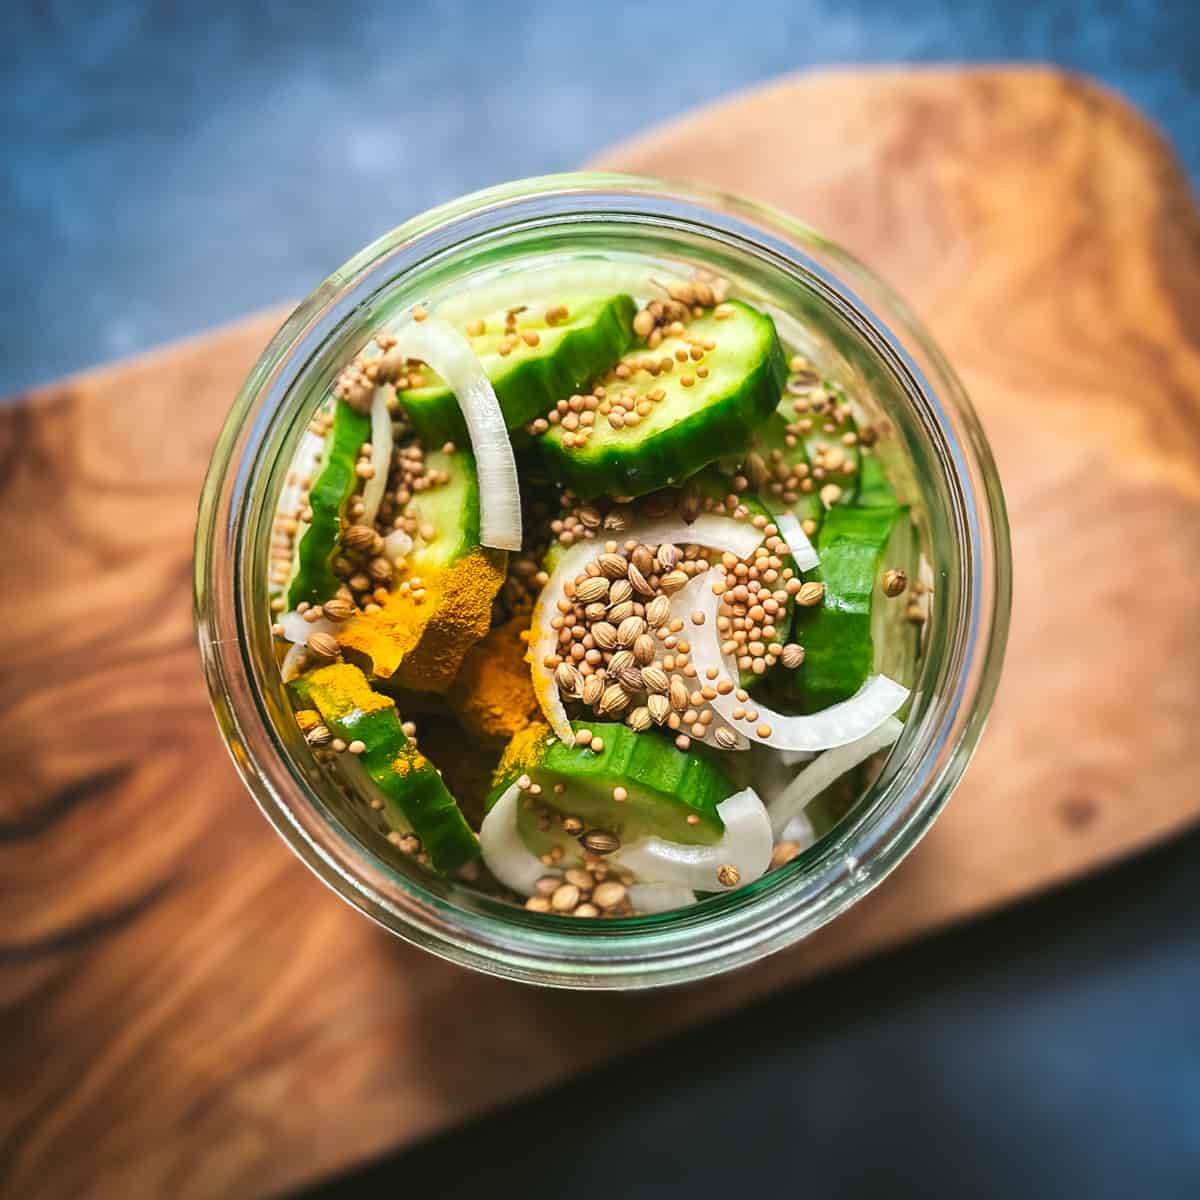 Top view of jar with sliced cucumbers, onions, and whole spices for pickling. 